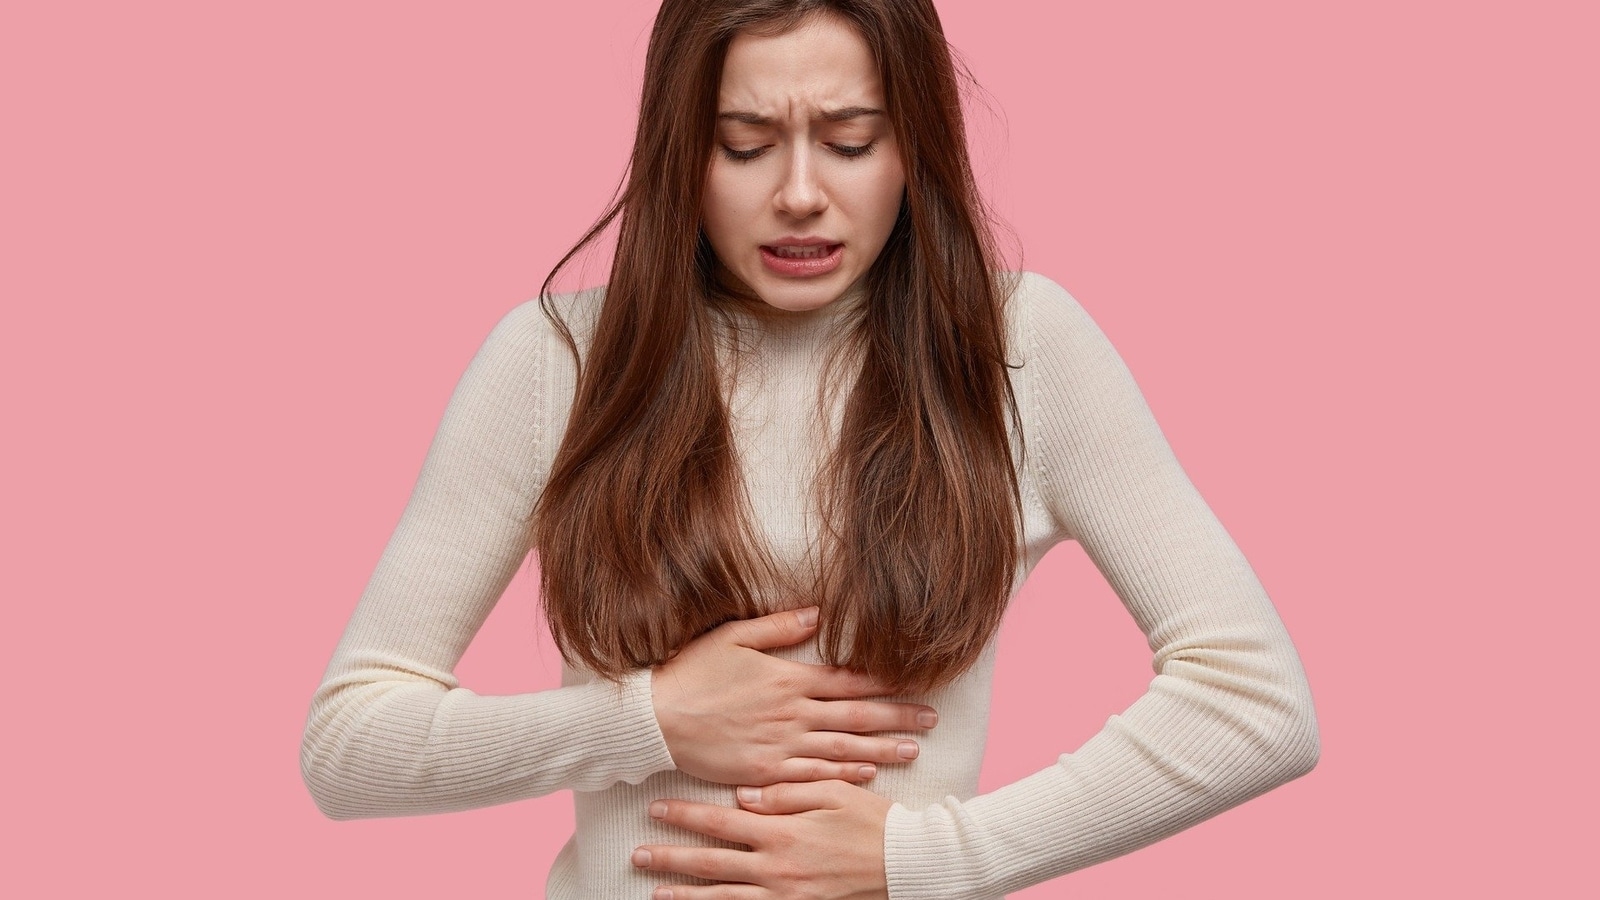 Endometriosis: Don’t ignore painful periods, it could be ‘chocolate cyst’